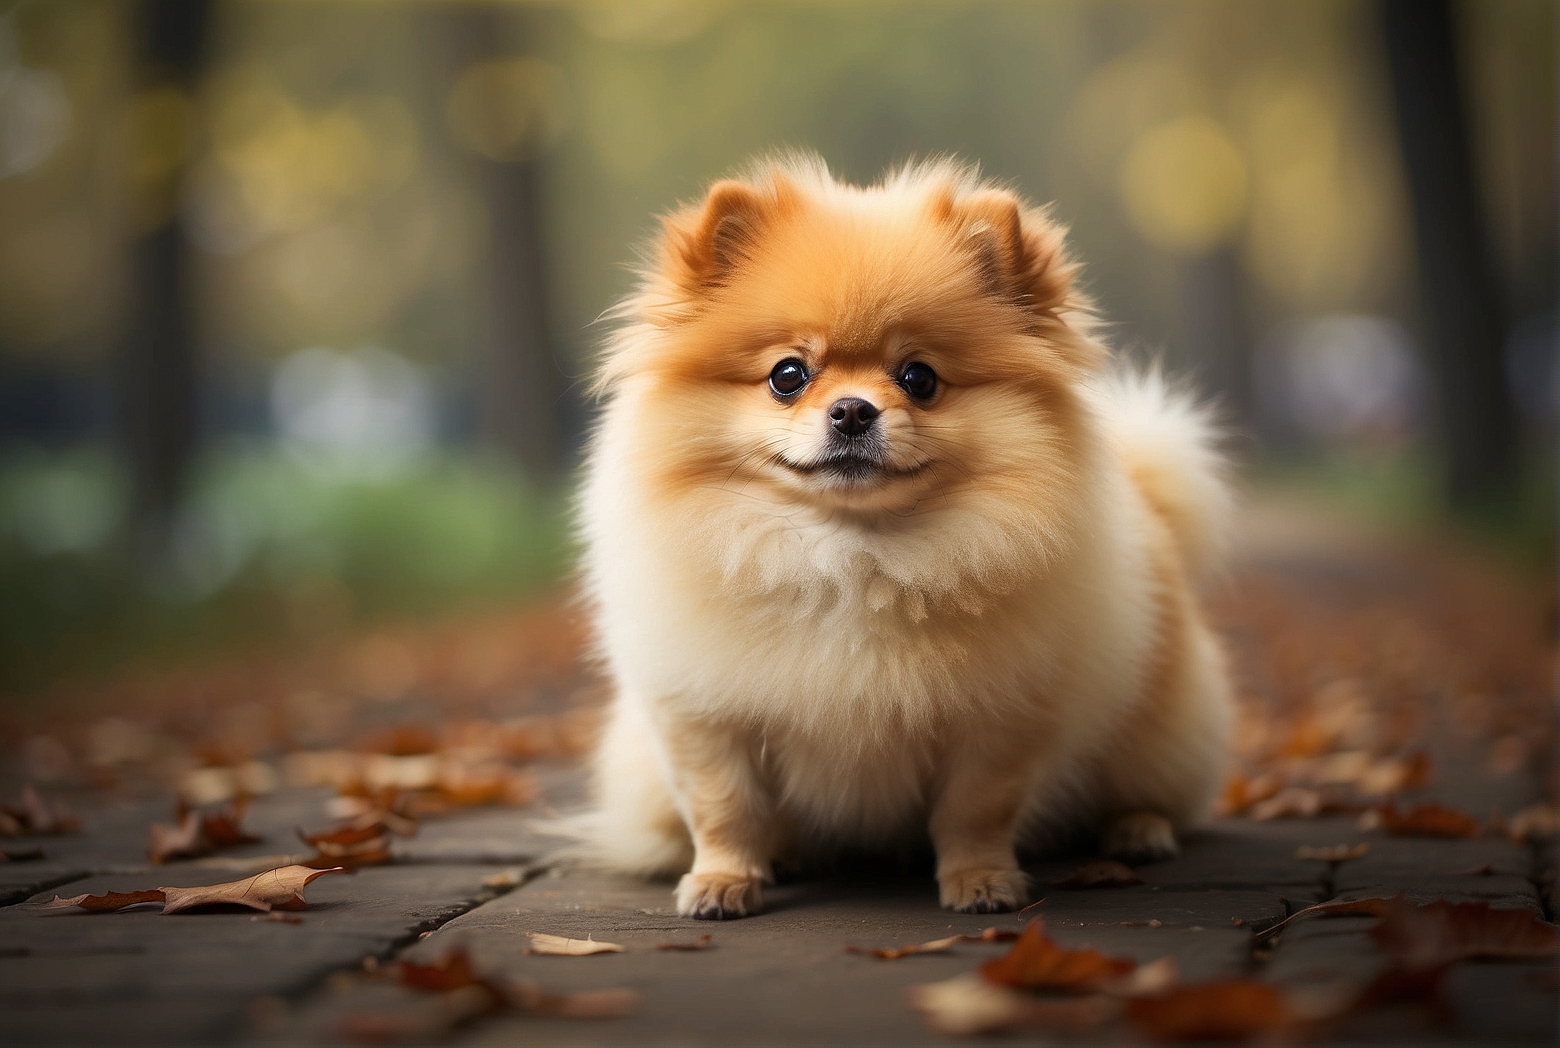 Why is my Pomeranian smaller than average?